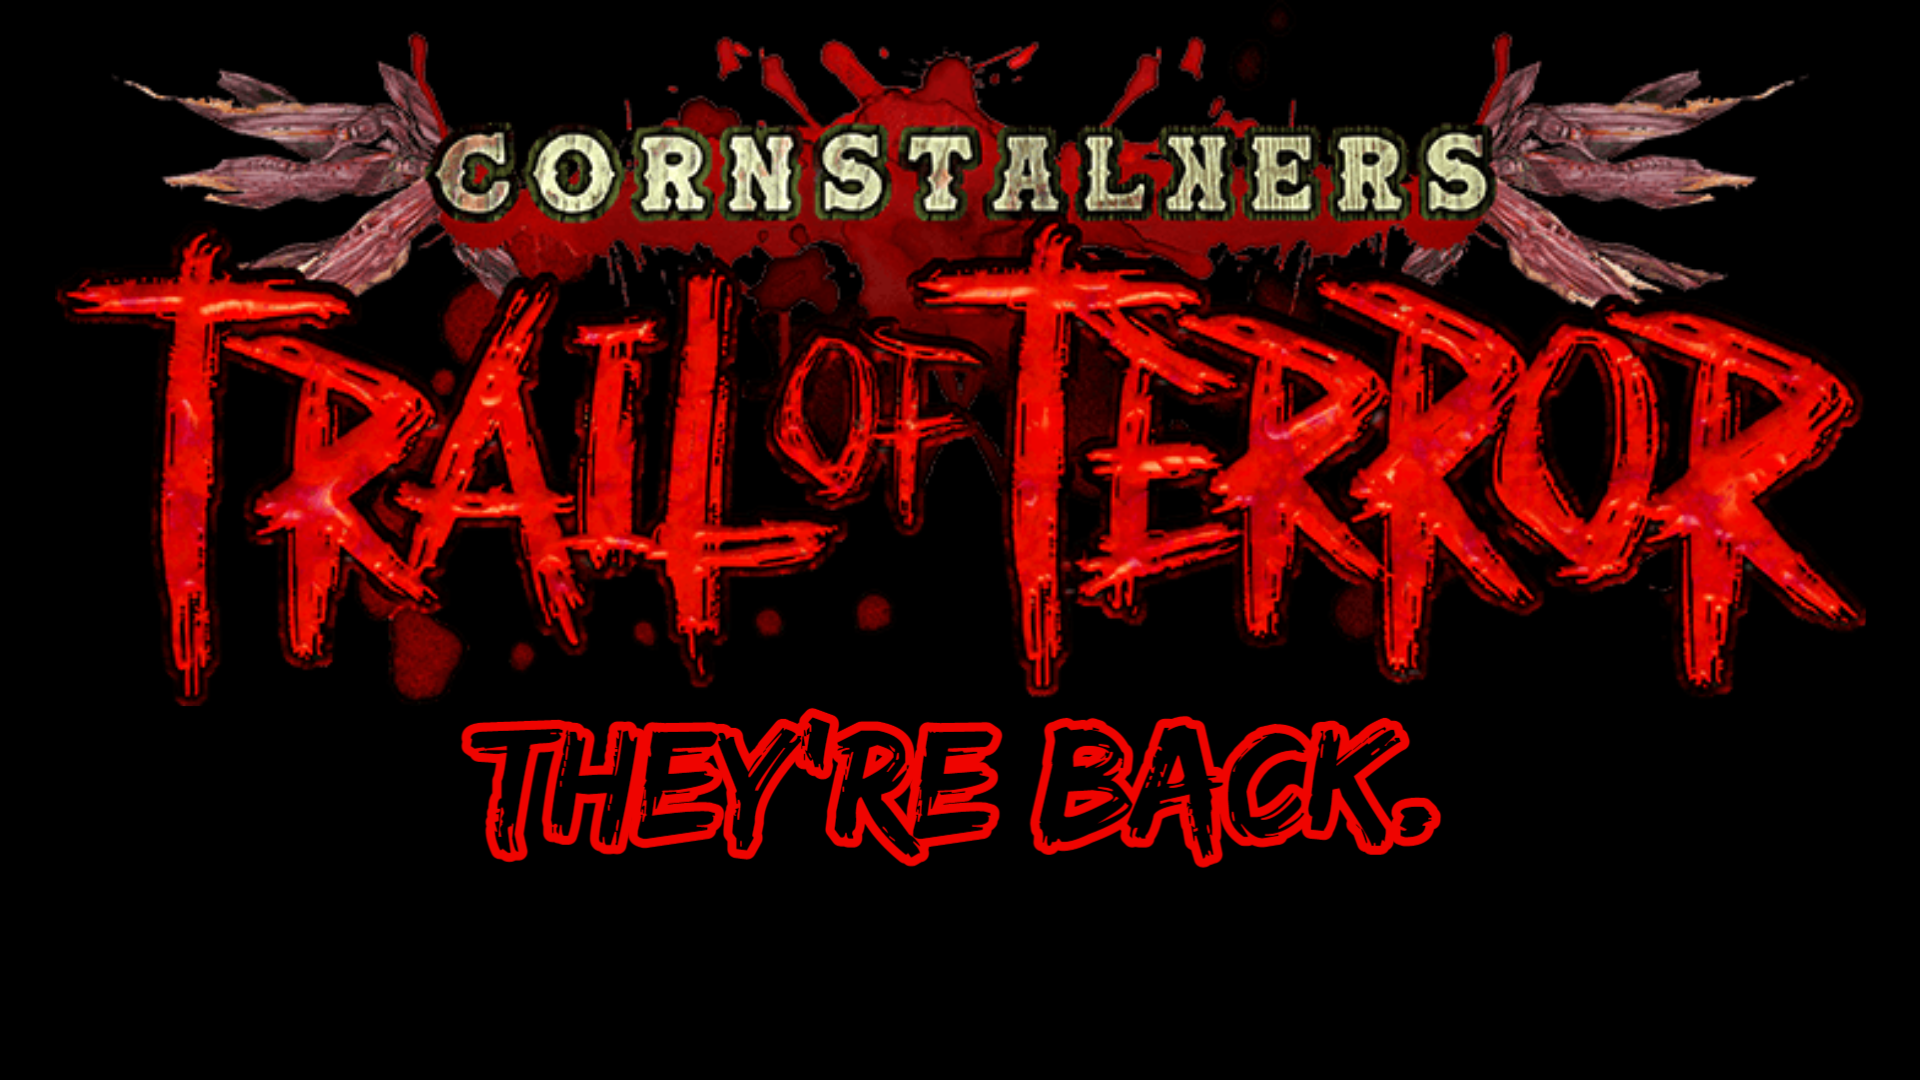 The Trail of Terror is Back!